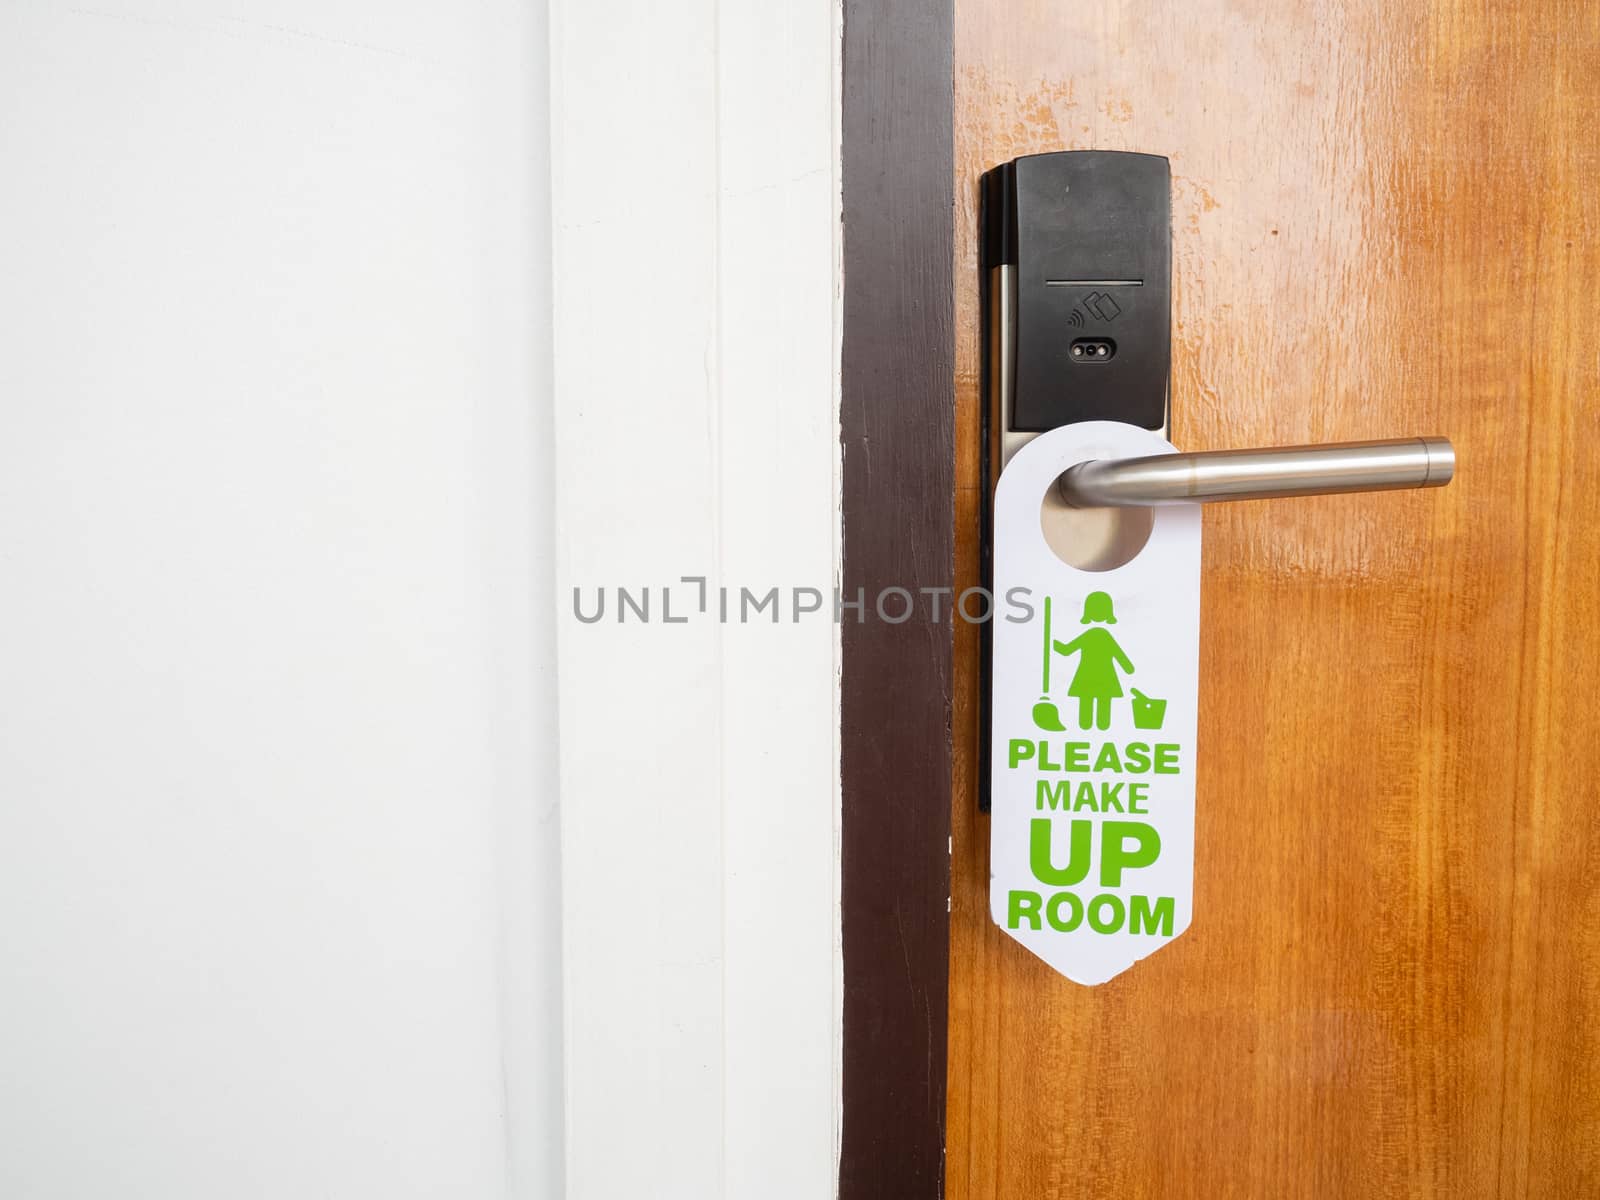 Make up room sign attached to the front of the room that is closed inside the hotel on the wooden door with stainless steel handles and use the electronic key system.